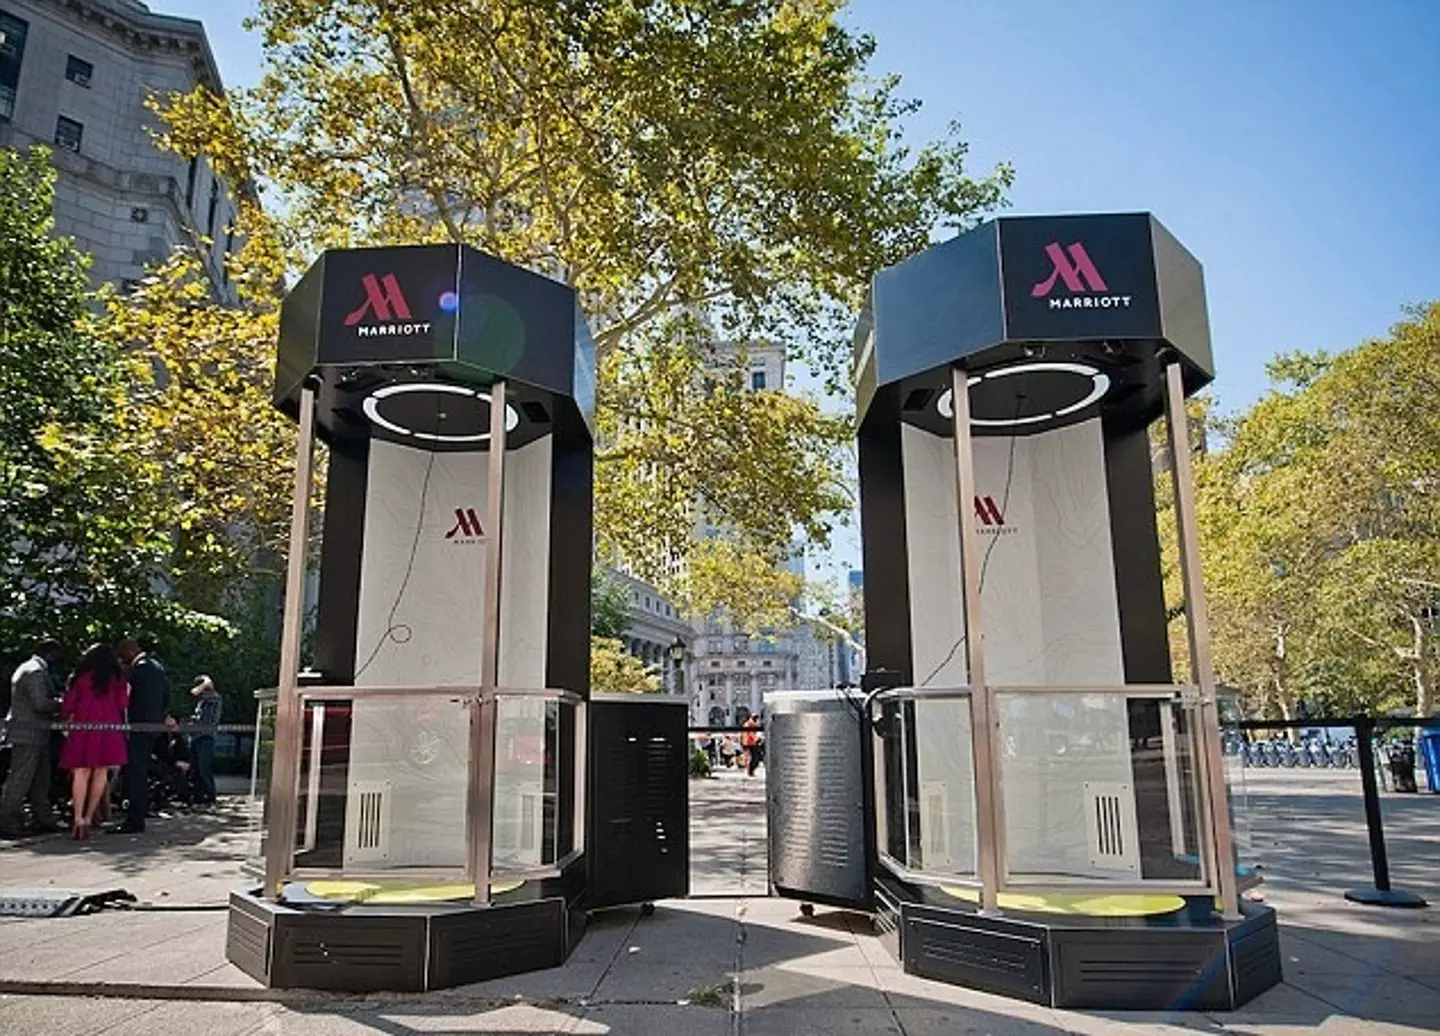 The Teleporter can take you on a 100-second journey across the globe.